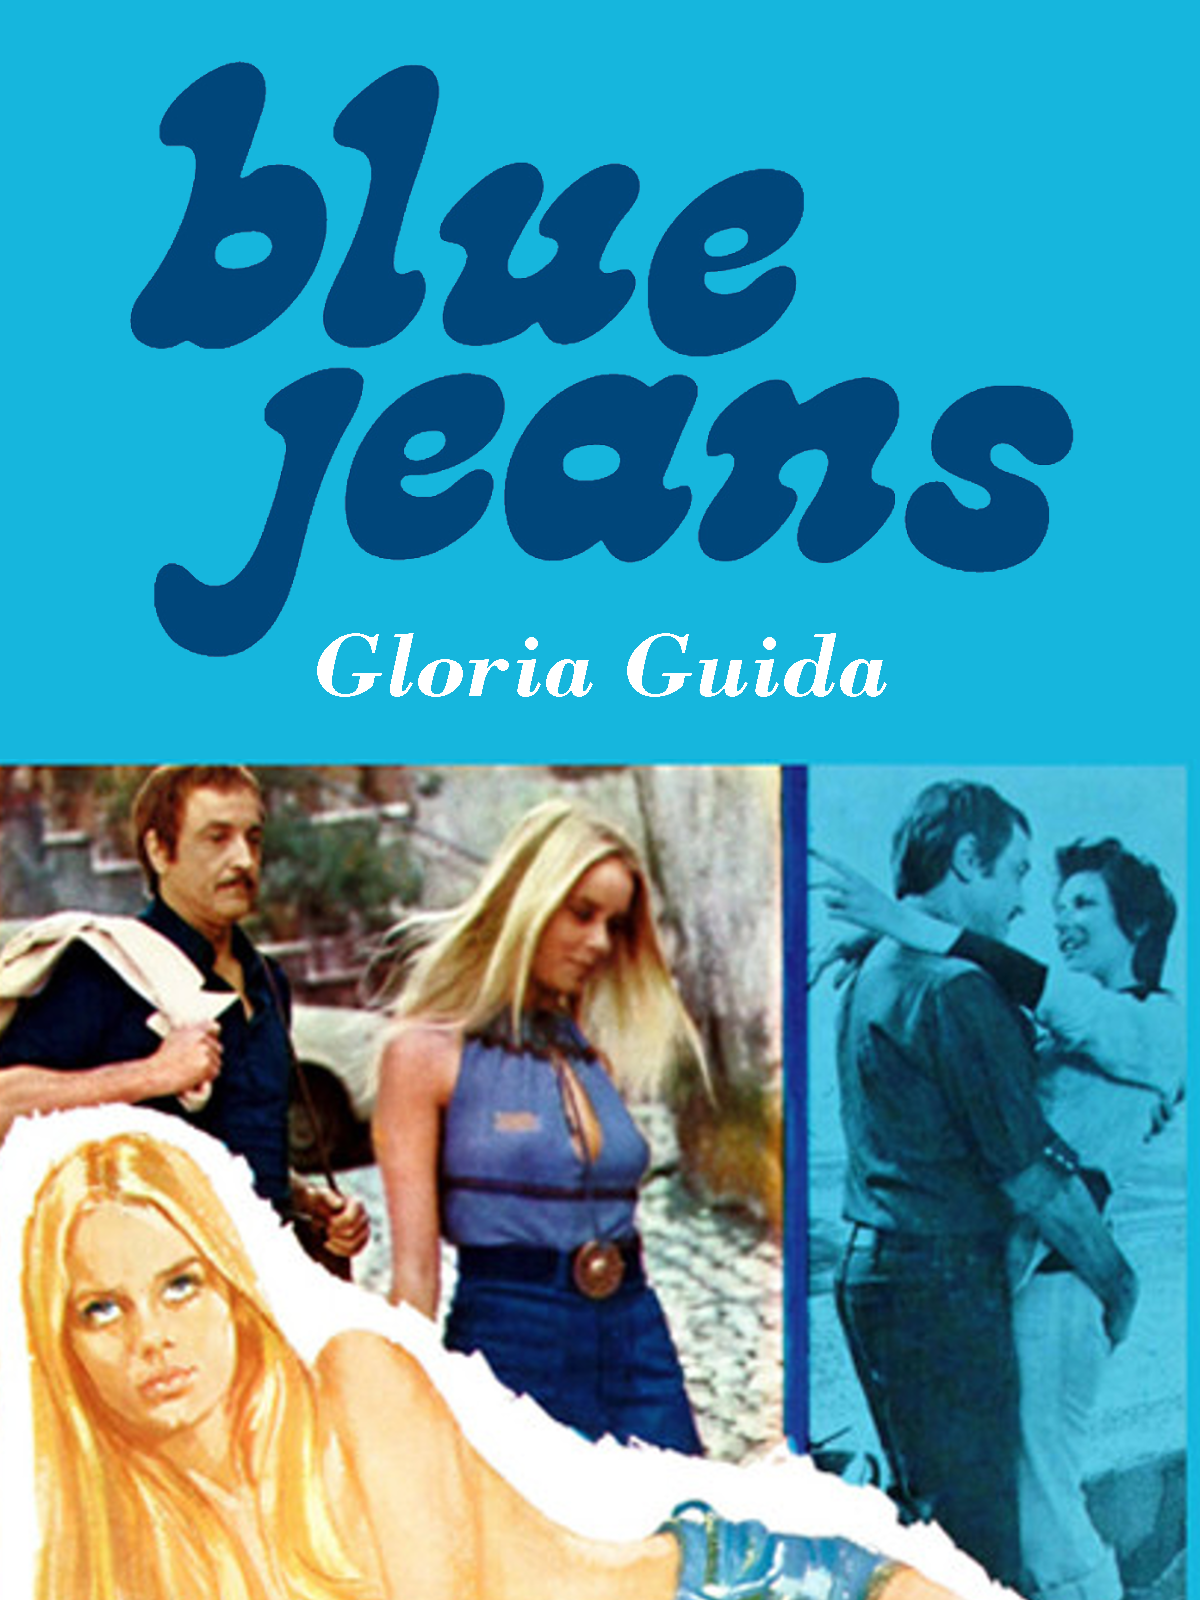 cindee white recommends gloria guida blue jeans pic